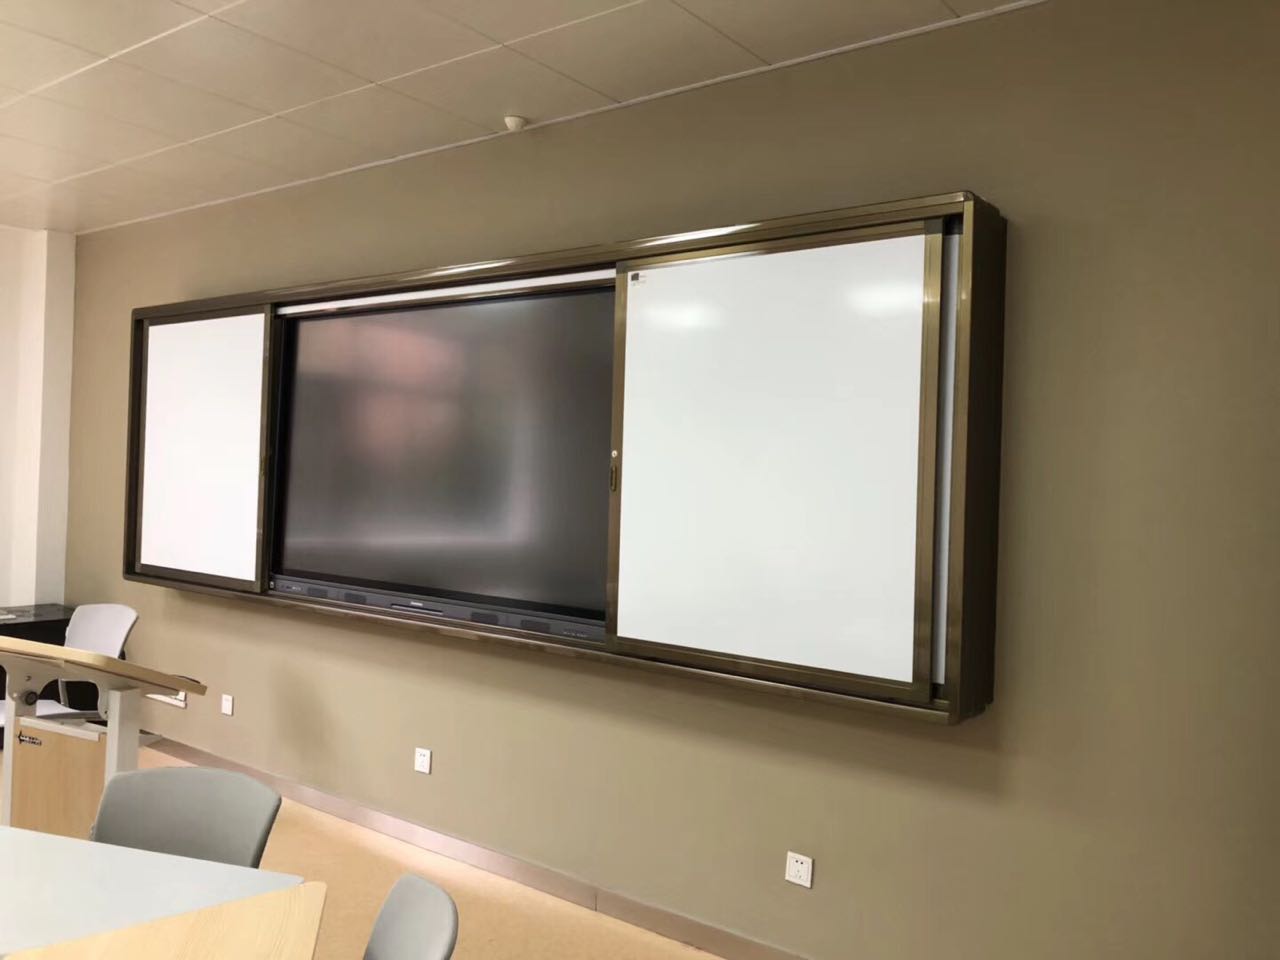 Dry Erase Magnetic Whiteboard